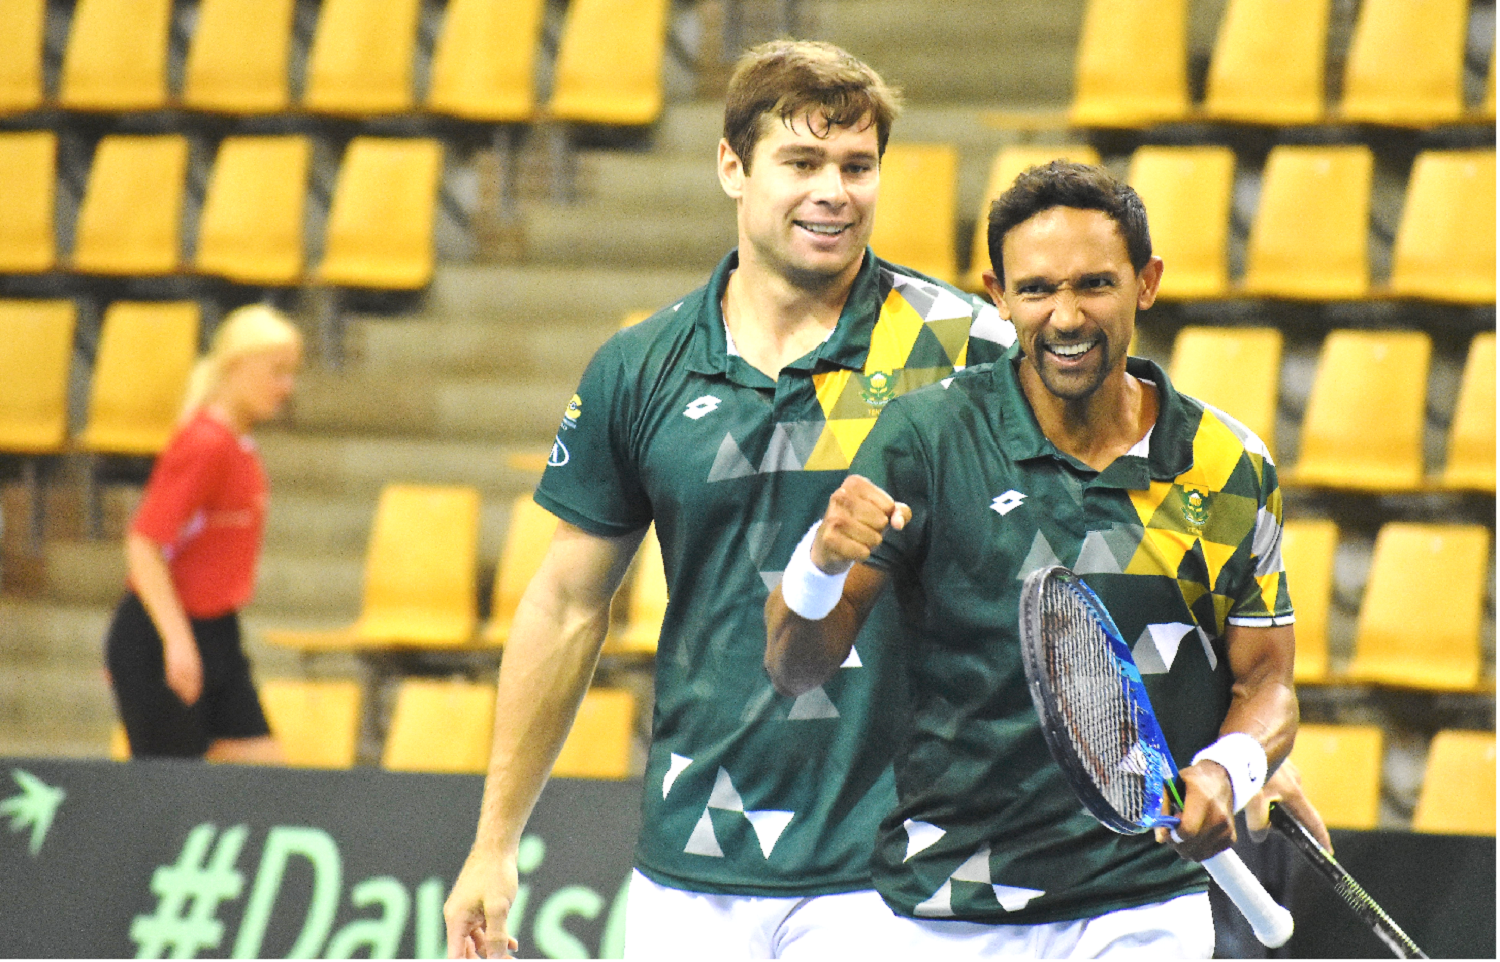 Watch our Davis Cup tie via live streaming